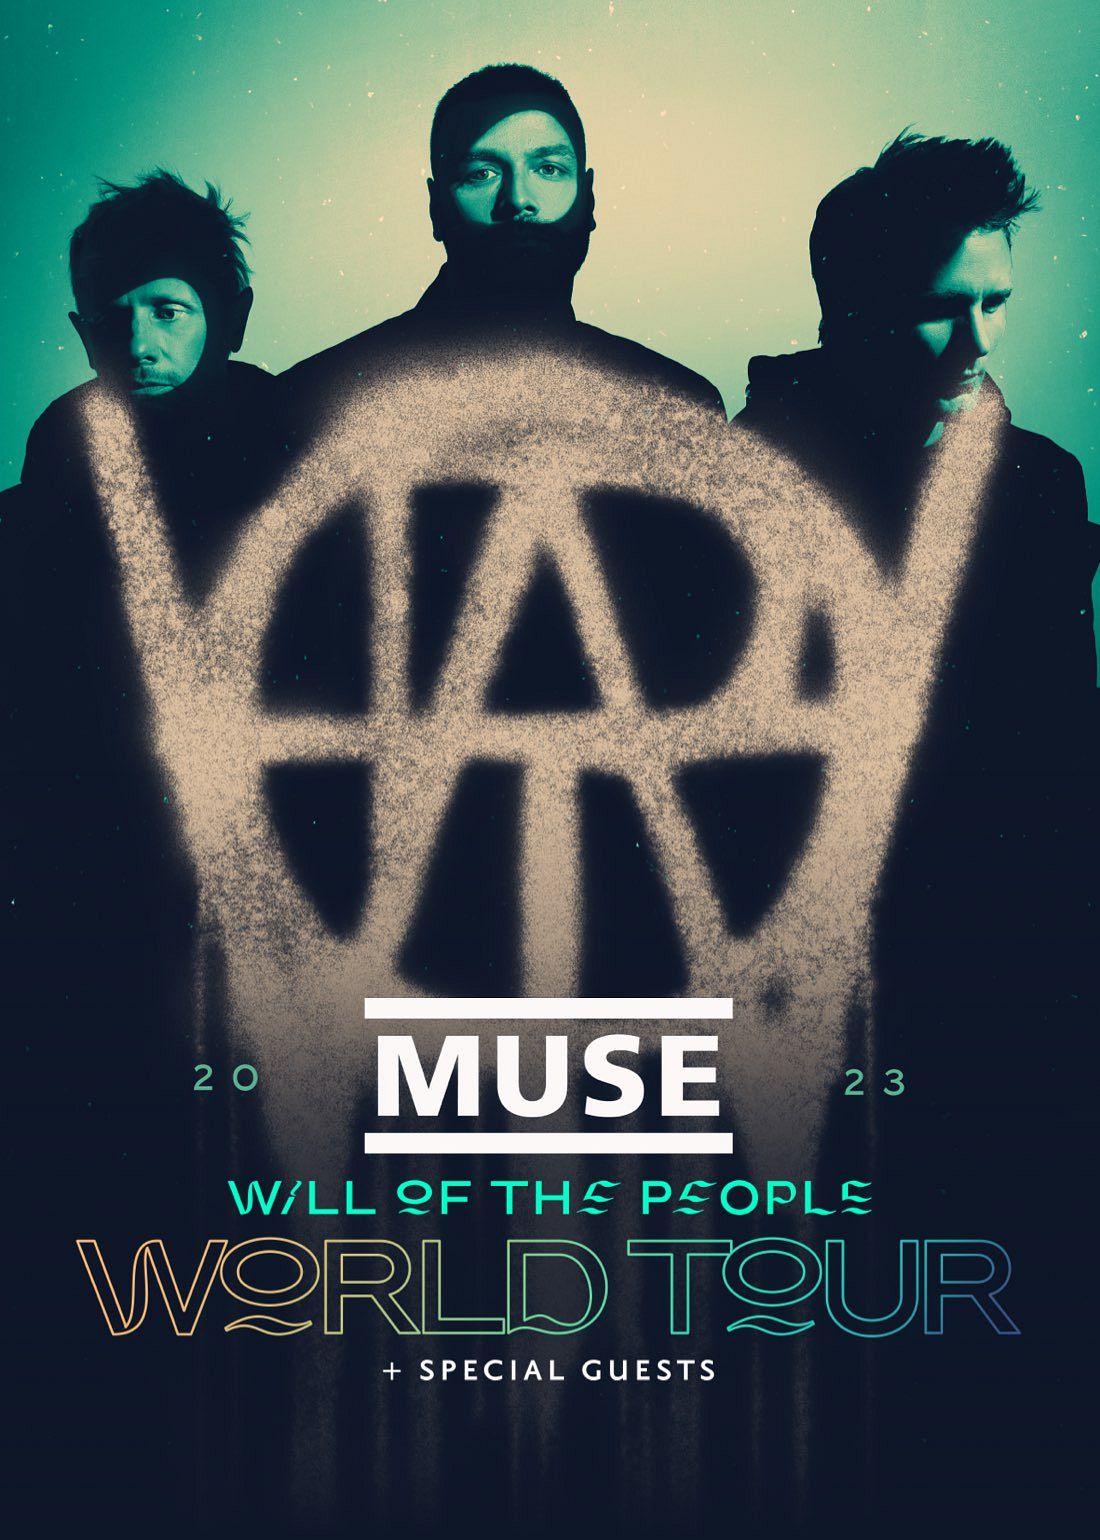 Muse Tickets at The National Bowl in Milton Keynes by Muse [Milton